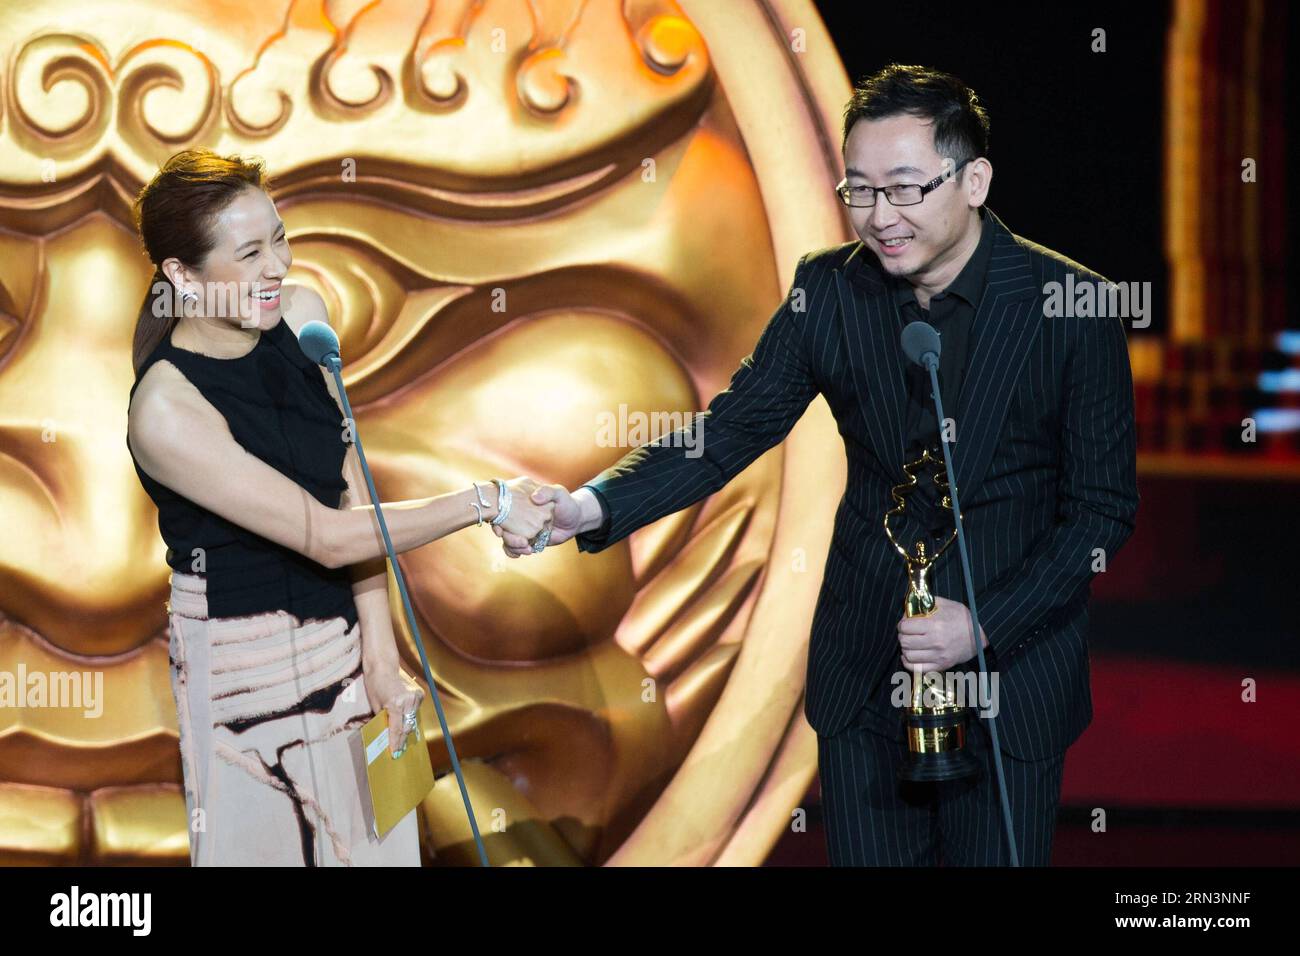 (150423) -- BEIJING, April 23, 2015 -- Guests Lu Chuan (R) and Karena Lam attend the awarding ceremony of the Tiantan Award of the fifth Beijing International Film Festival (BJIFF) in Beijing, capital of China, April 23, 2015. ) (mp) CHINA-BEIJING-FILM FESTIVAL-TIANTAN AWARD (CN) ChenxJianli PUBLICATIONxNOTxINxCHN   Beijing April 23 2015 Guests Lu Chuan r and KARENA LAM attend The awarding Ceremony of The Tiantan Award of The Fifth Beijing International Film Festival  in Beijing Capital of China April 23 2015 MP China Beijing Film Festival Tiantan Award CN ChenxJianli PUBLICATIONxNOTxINxCHN Stock Photo